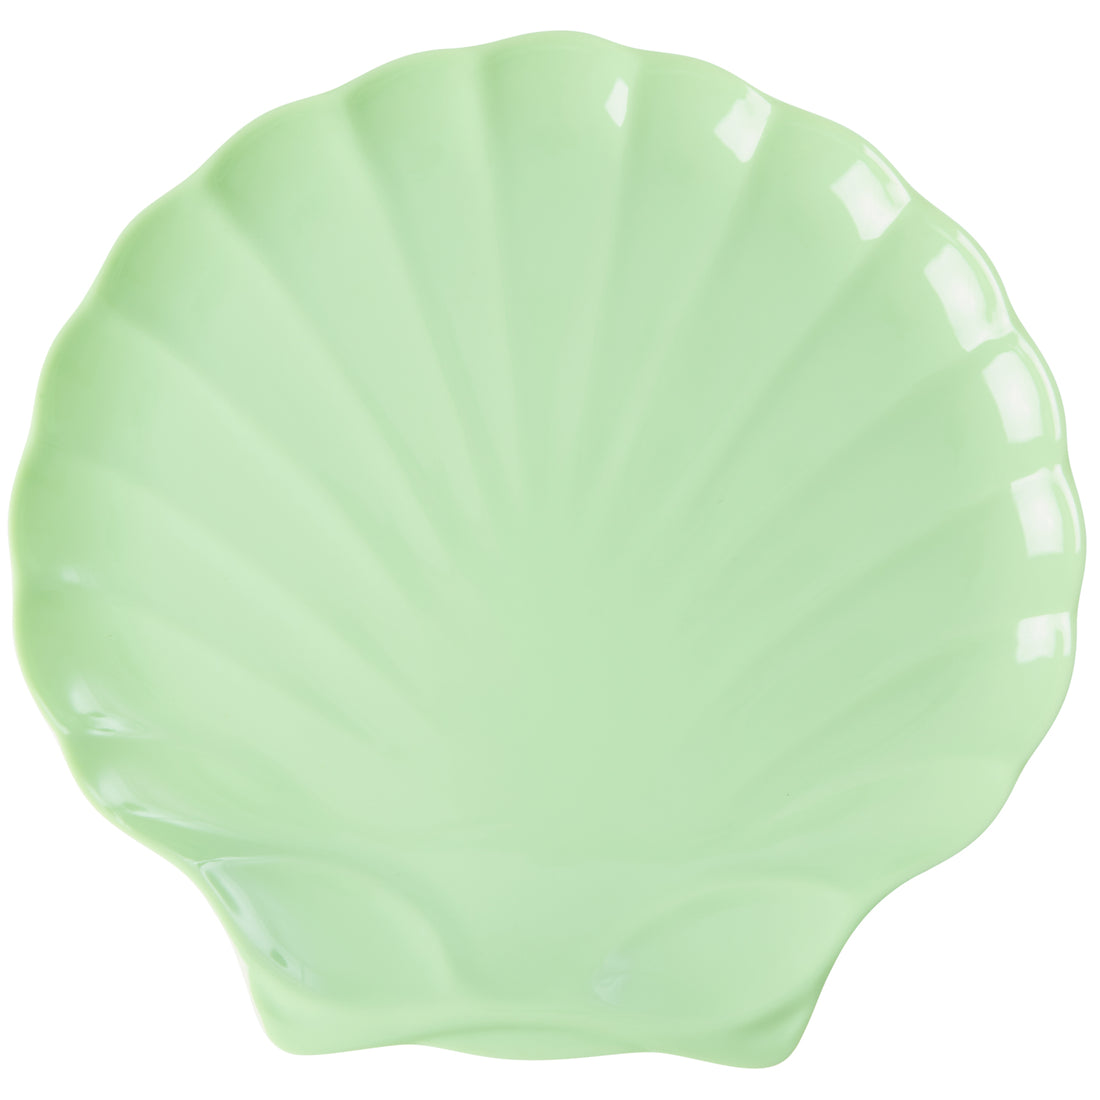 rice-dk-melamine-serving-dish-in-sea-shell-shape-neon-green-extra-large-rice-melse-xlng-